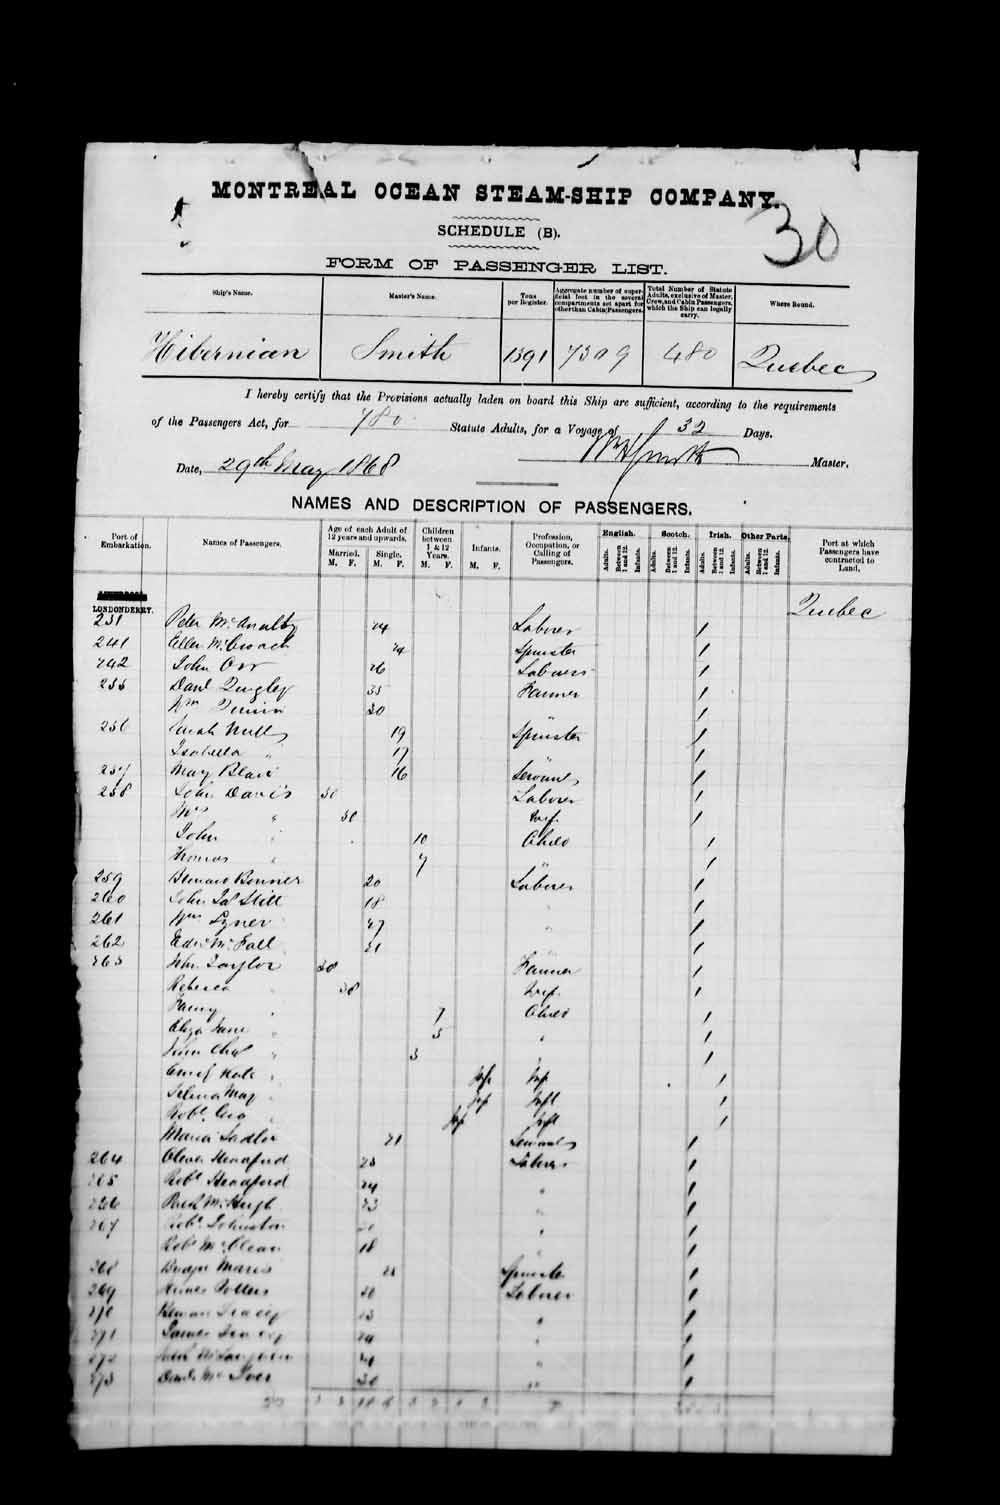 Digitized page of Passenger Lists for Image No.: e003530468